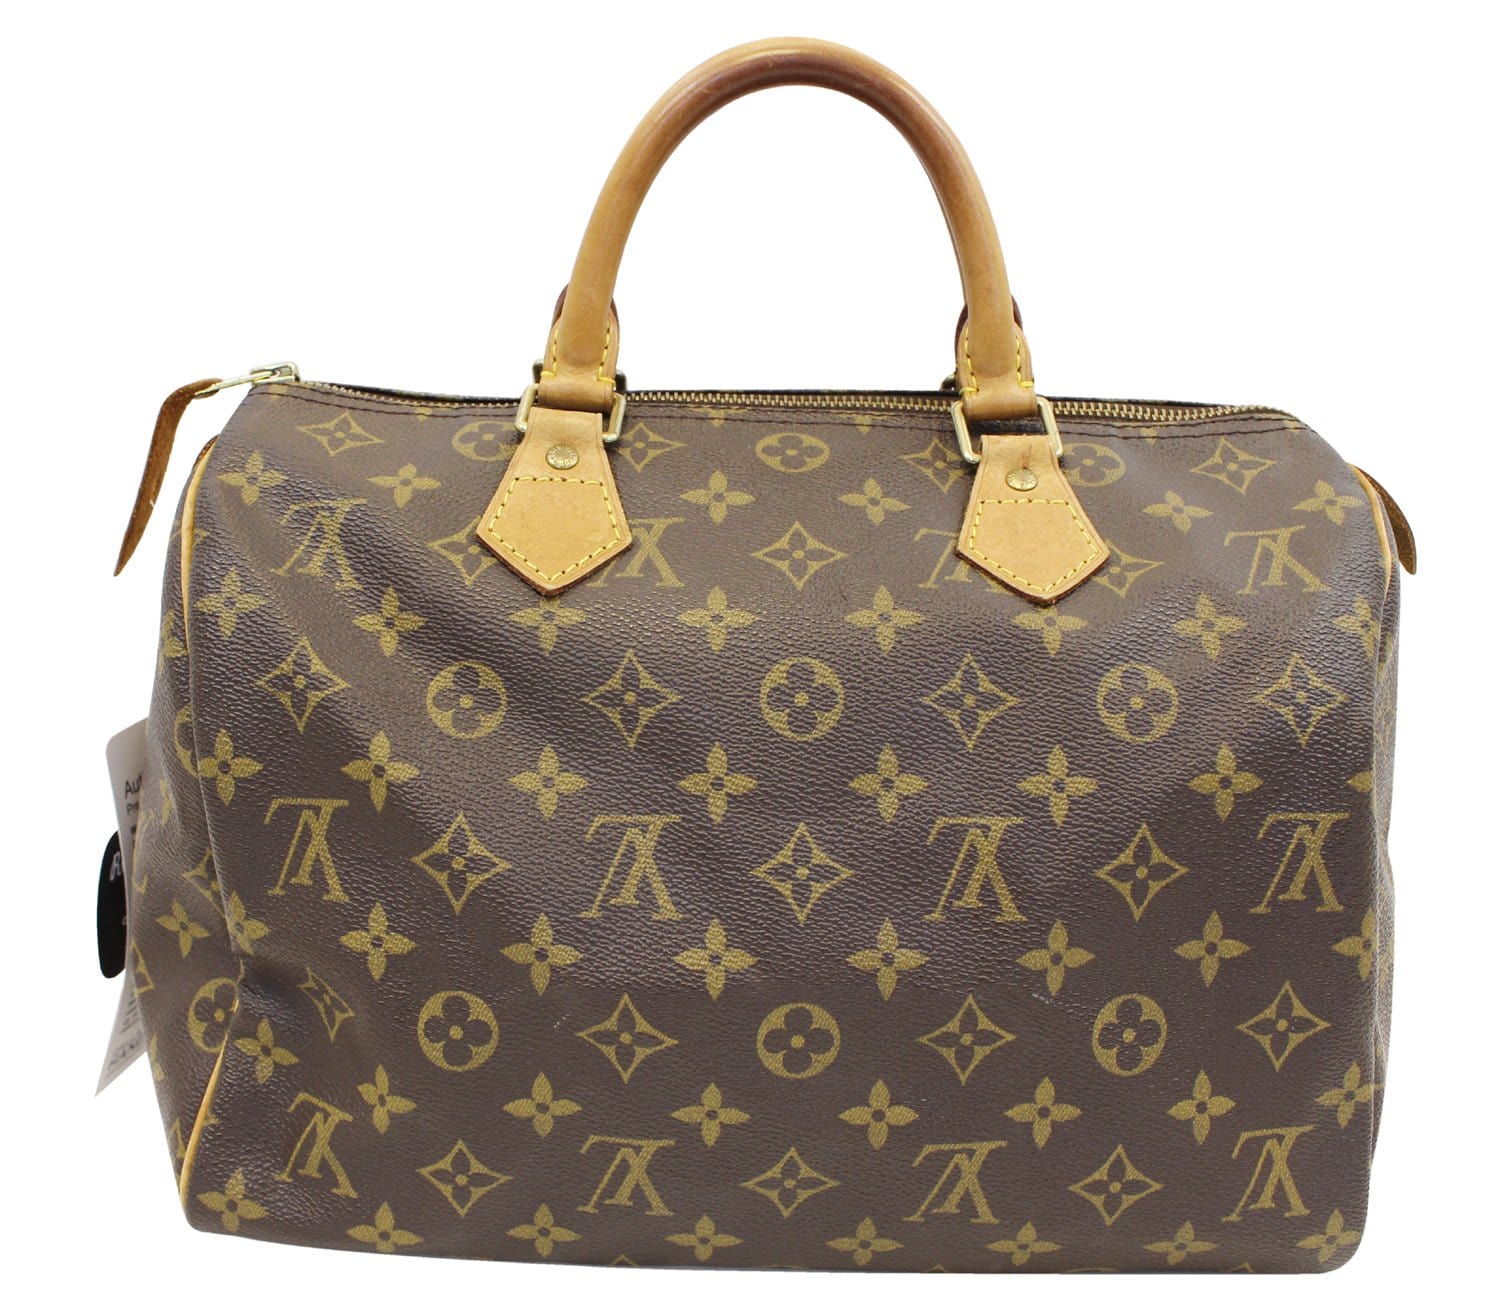 Where To Sell Used Louis Vuitton Bags - Best Design Idea